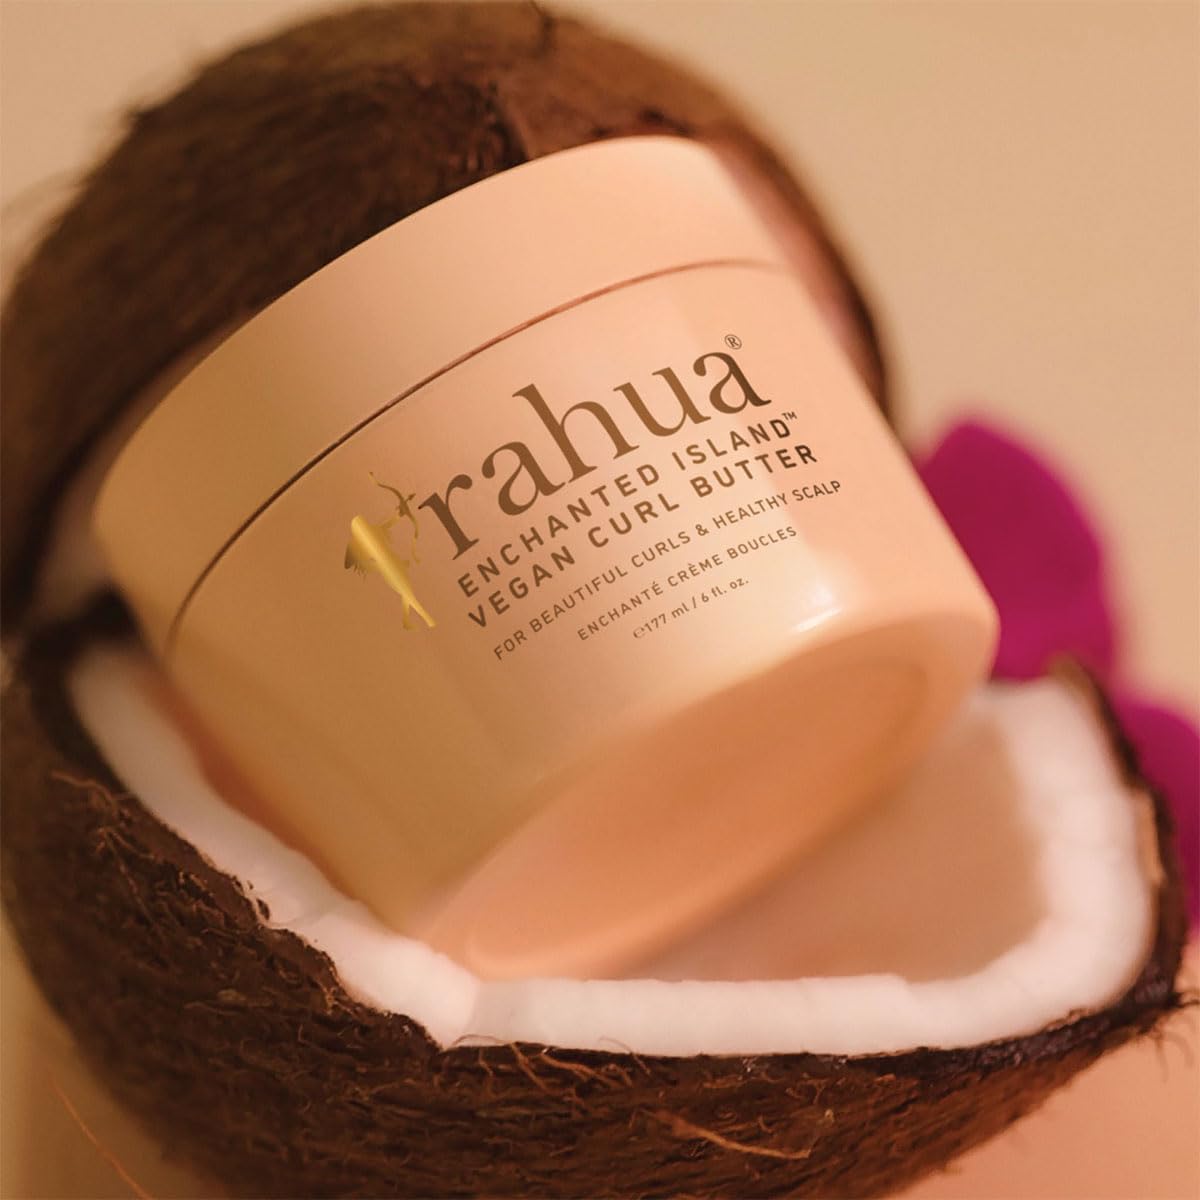 Rahua Enchanted Island Vegan Curl Butter 6 Fl Oz, For Curly Hair, Organic Ingredients for Beautiful Curls and Helthy Scalp